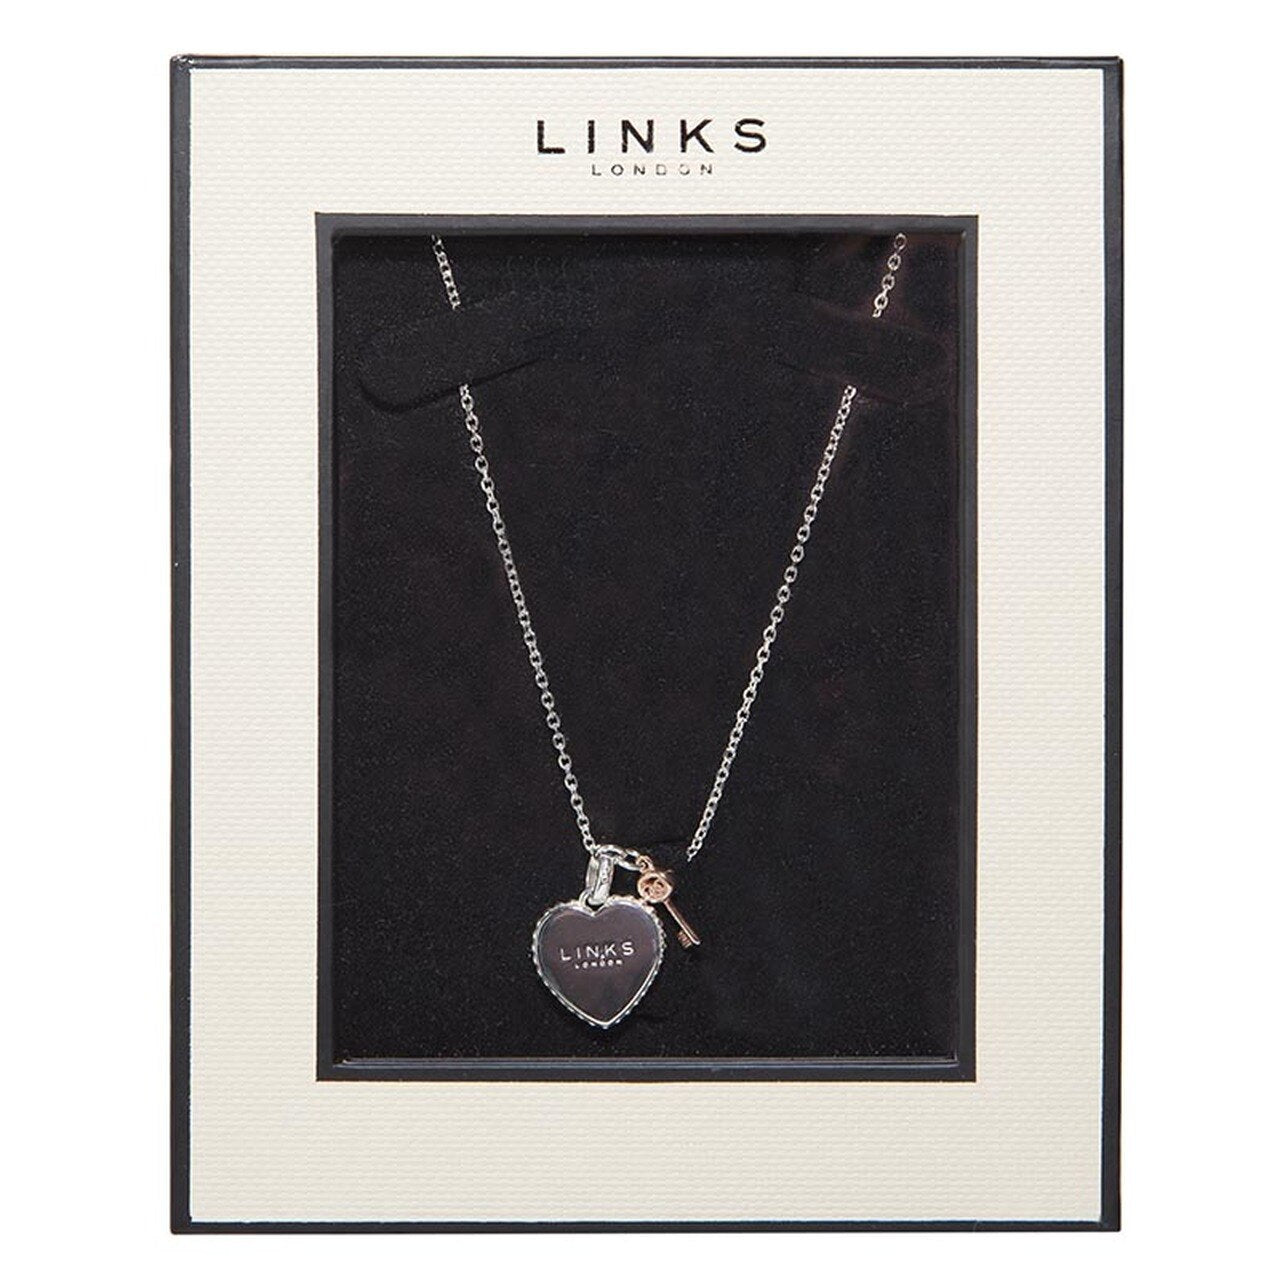 Links of London Sterling Silver Necklace in HP19 Aylesbury for £140.00 for  sale | Shpock